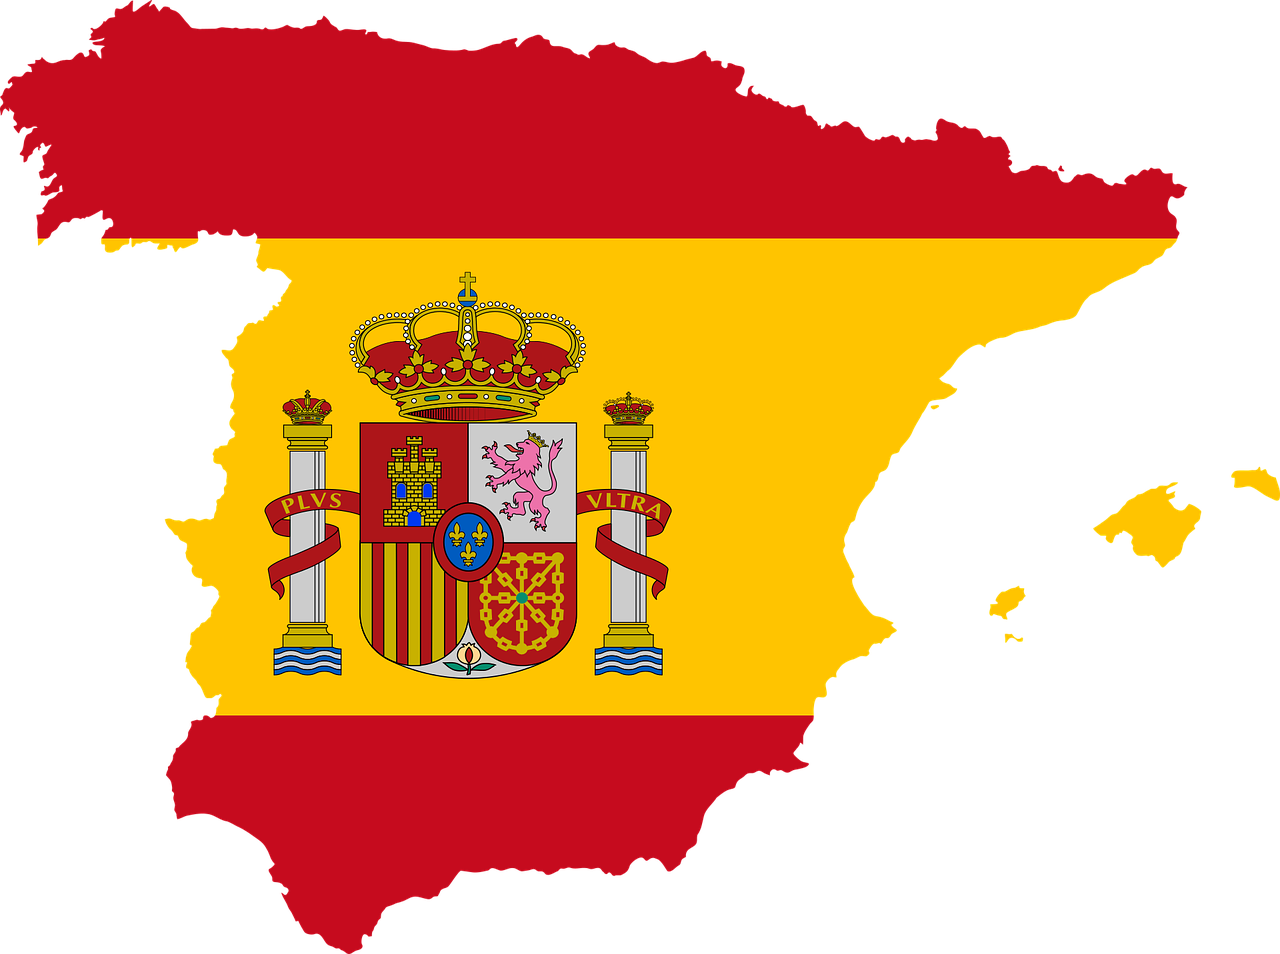 spain-g34774e384_1280.png